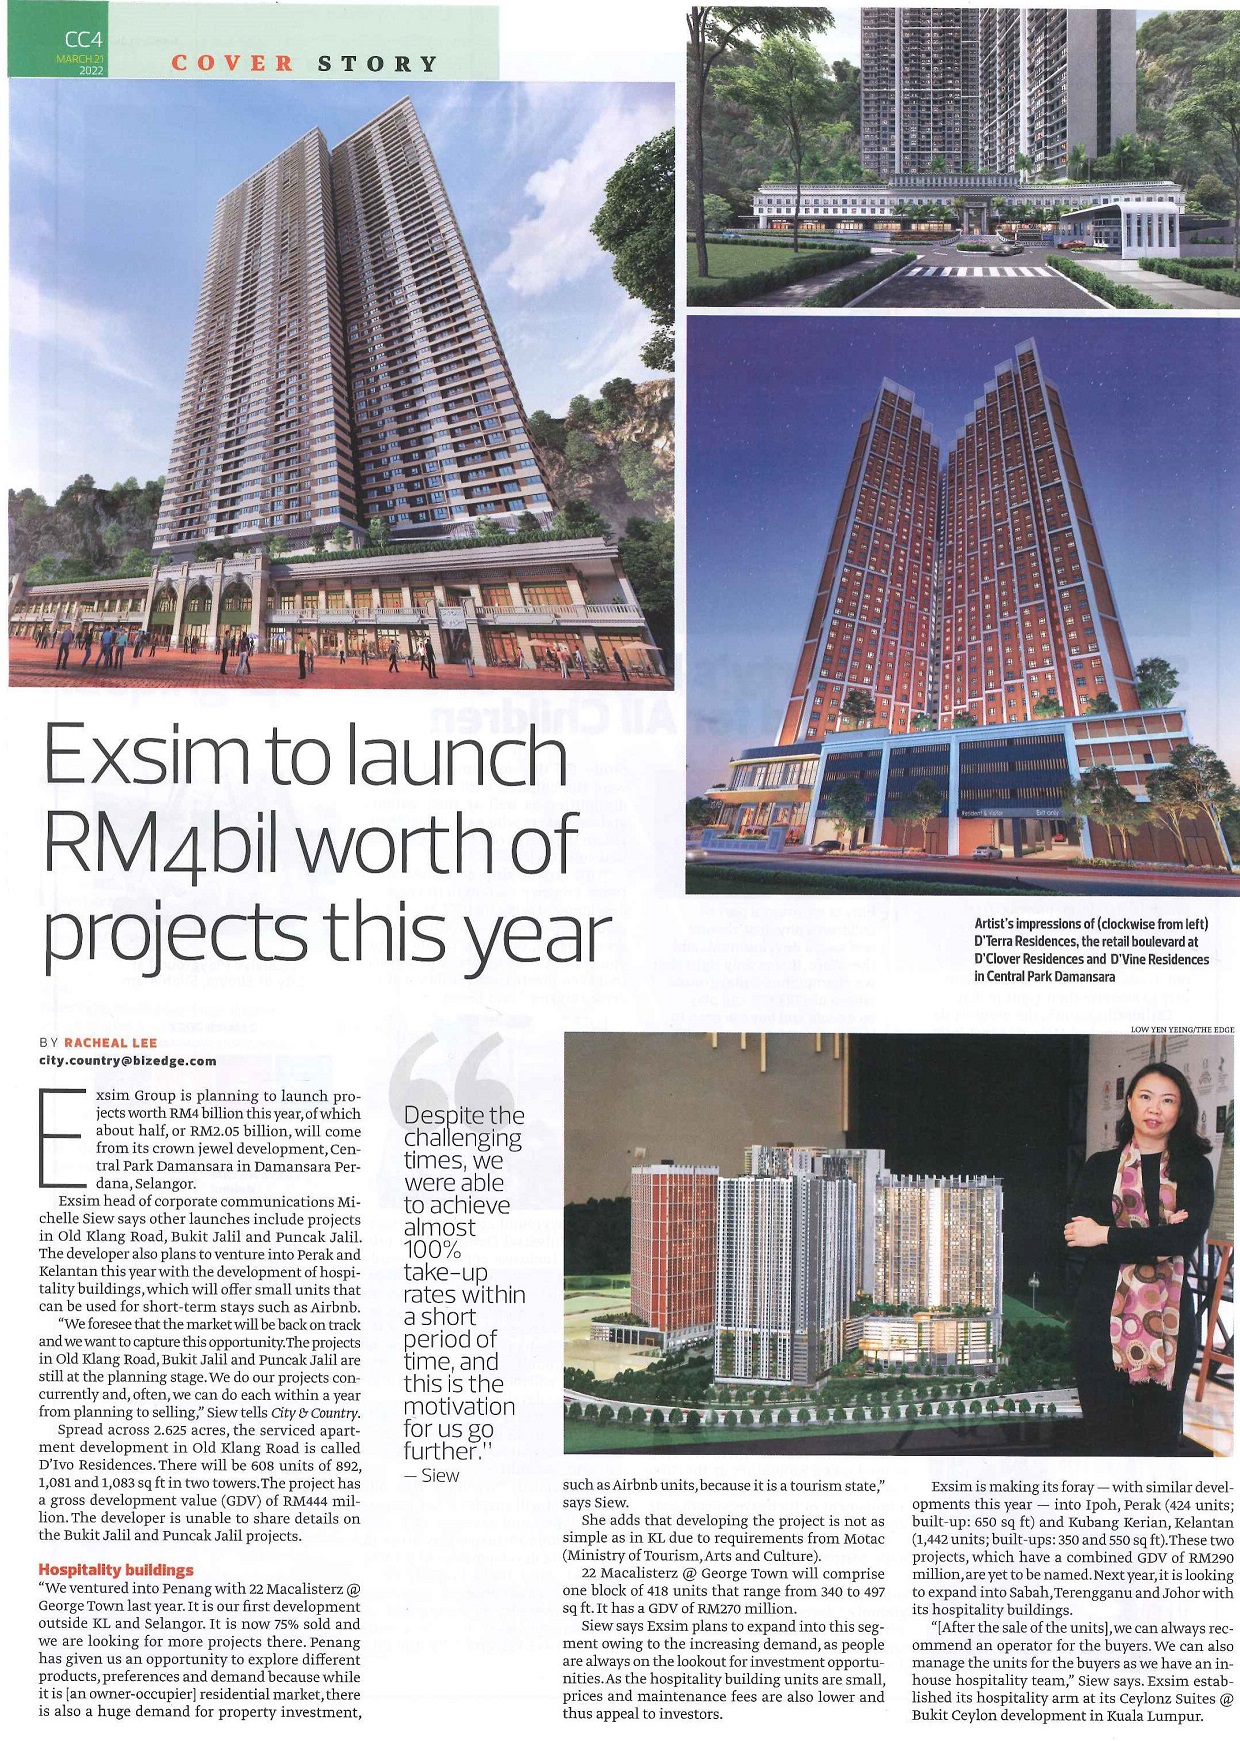 EXSIM TO LAUNCH RM4BIL WORTH OF PROJECTS THIS YEART